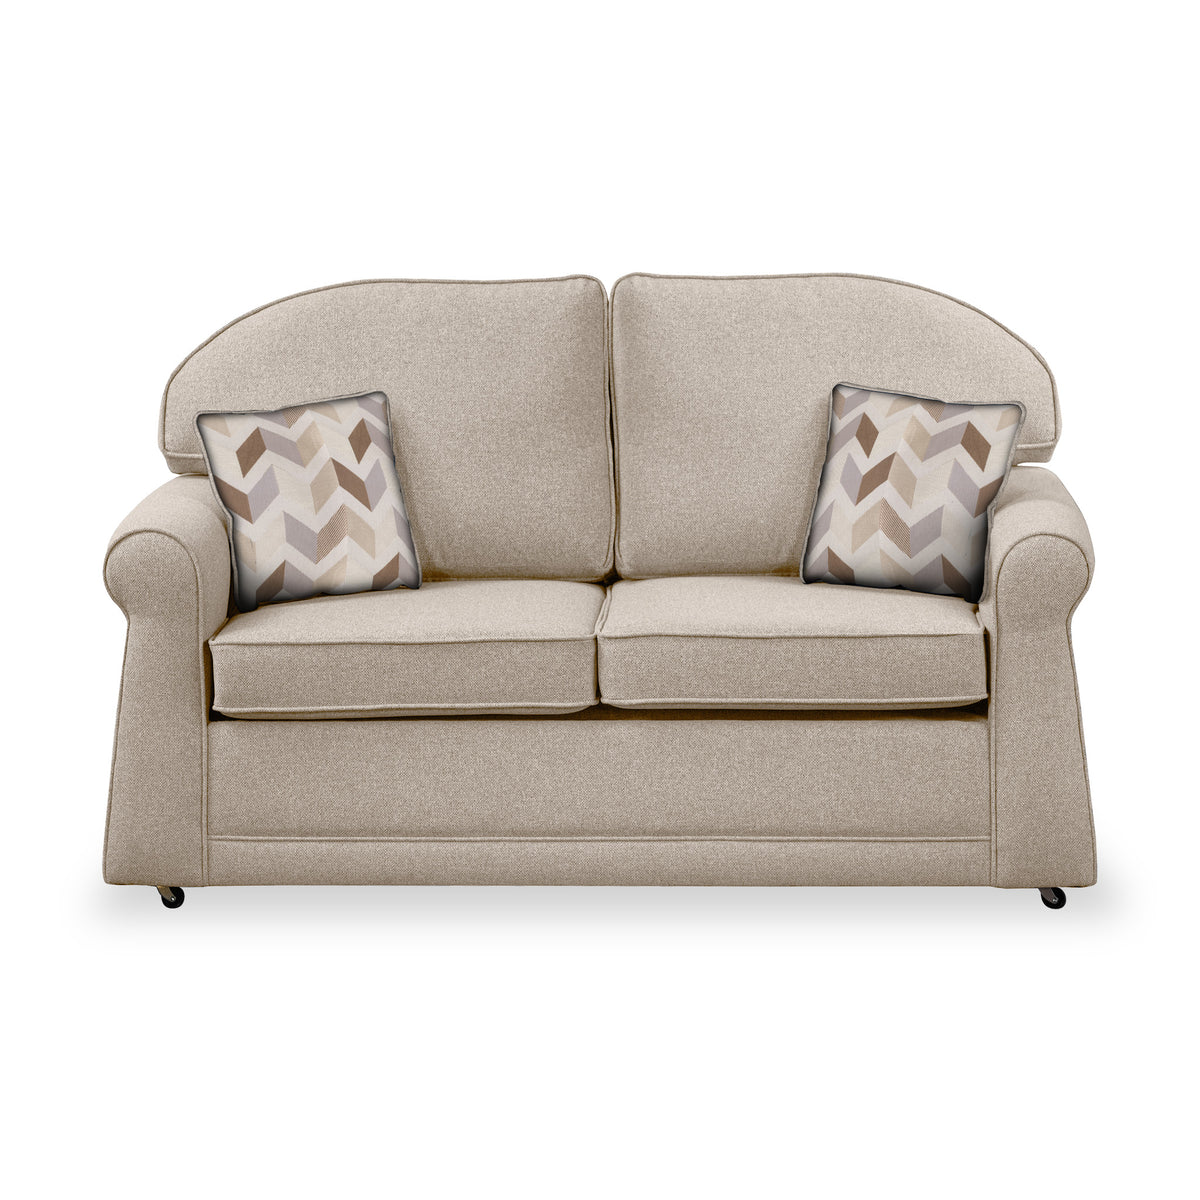 Giselle Fawn Soft Weave 2 Seater Sofabed with Oatmeal Scatter Cushions from Roseland Furniture